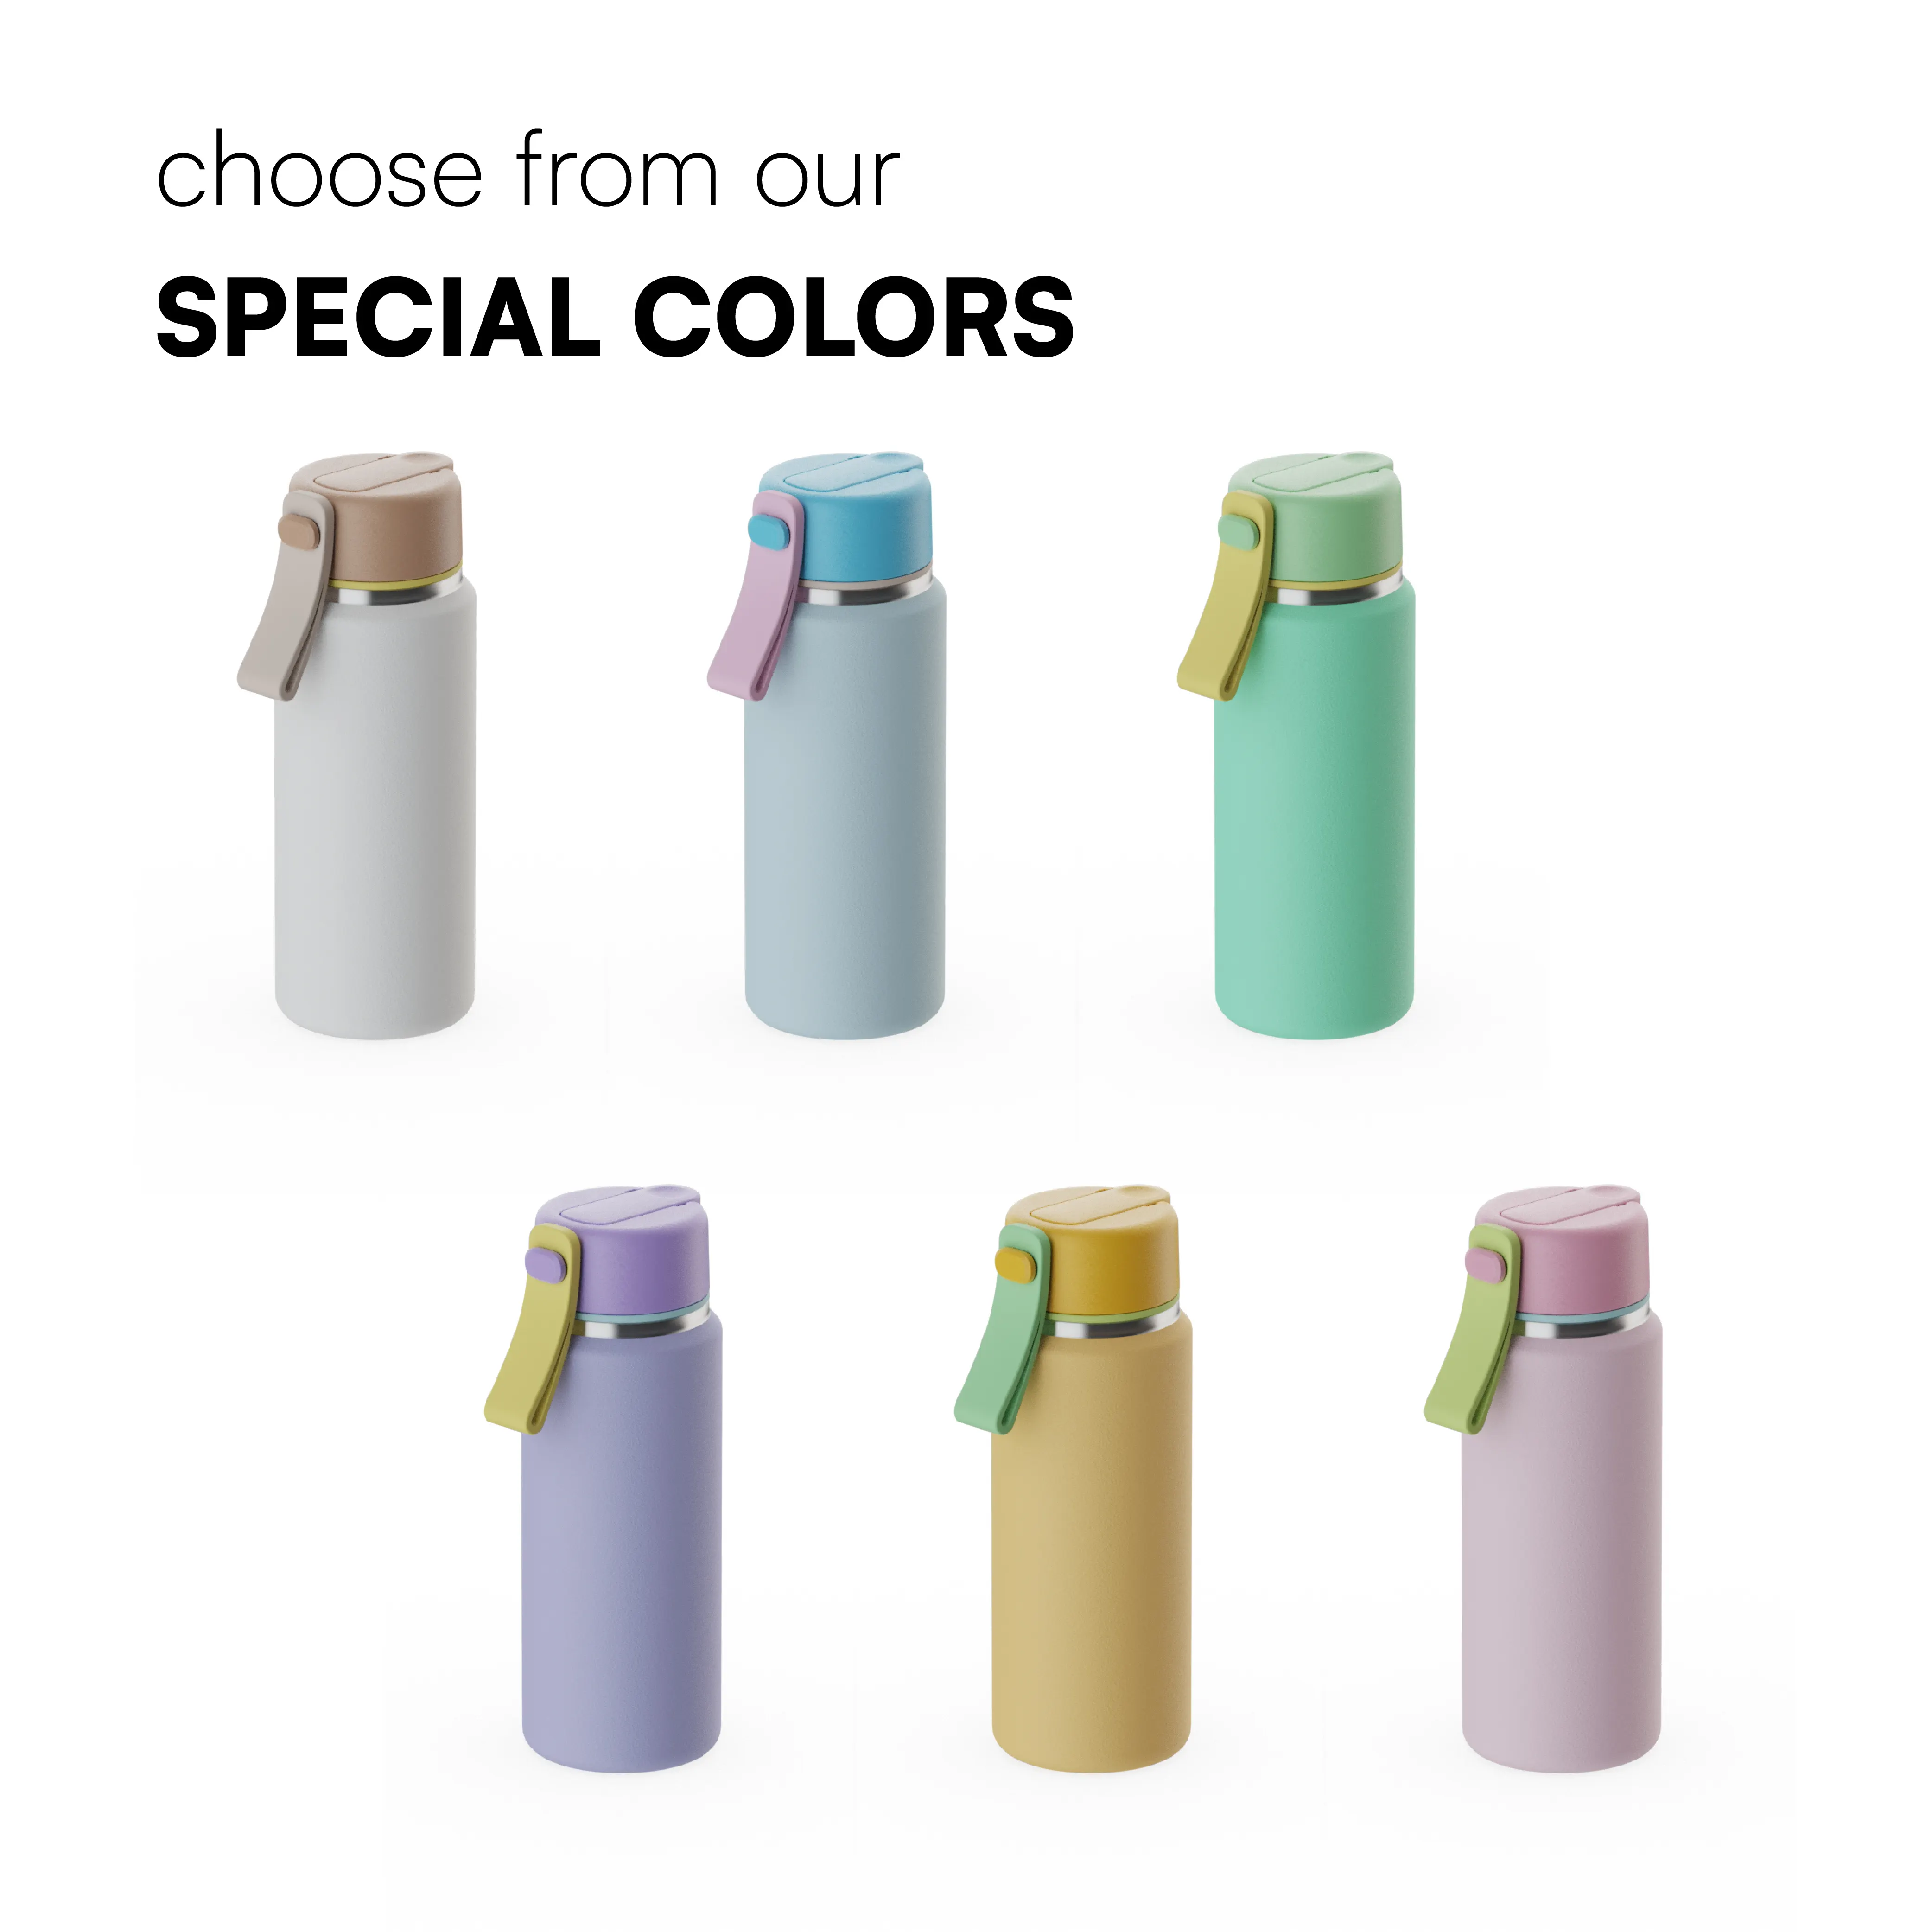 Portable Kids Water Bottle Super Slim Skinny Mini 18/8 Stainless Steel Tumbler Cup Insulated with Straw lid